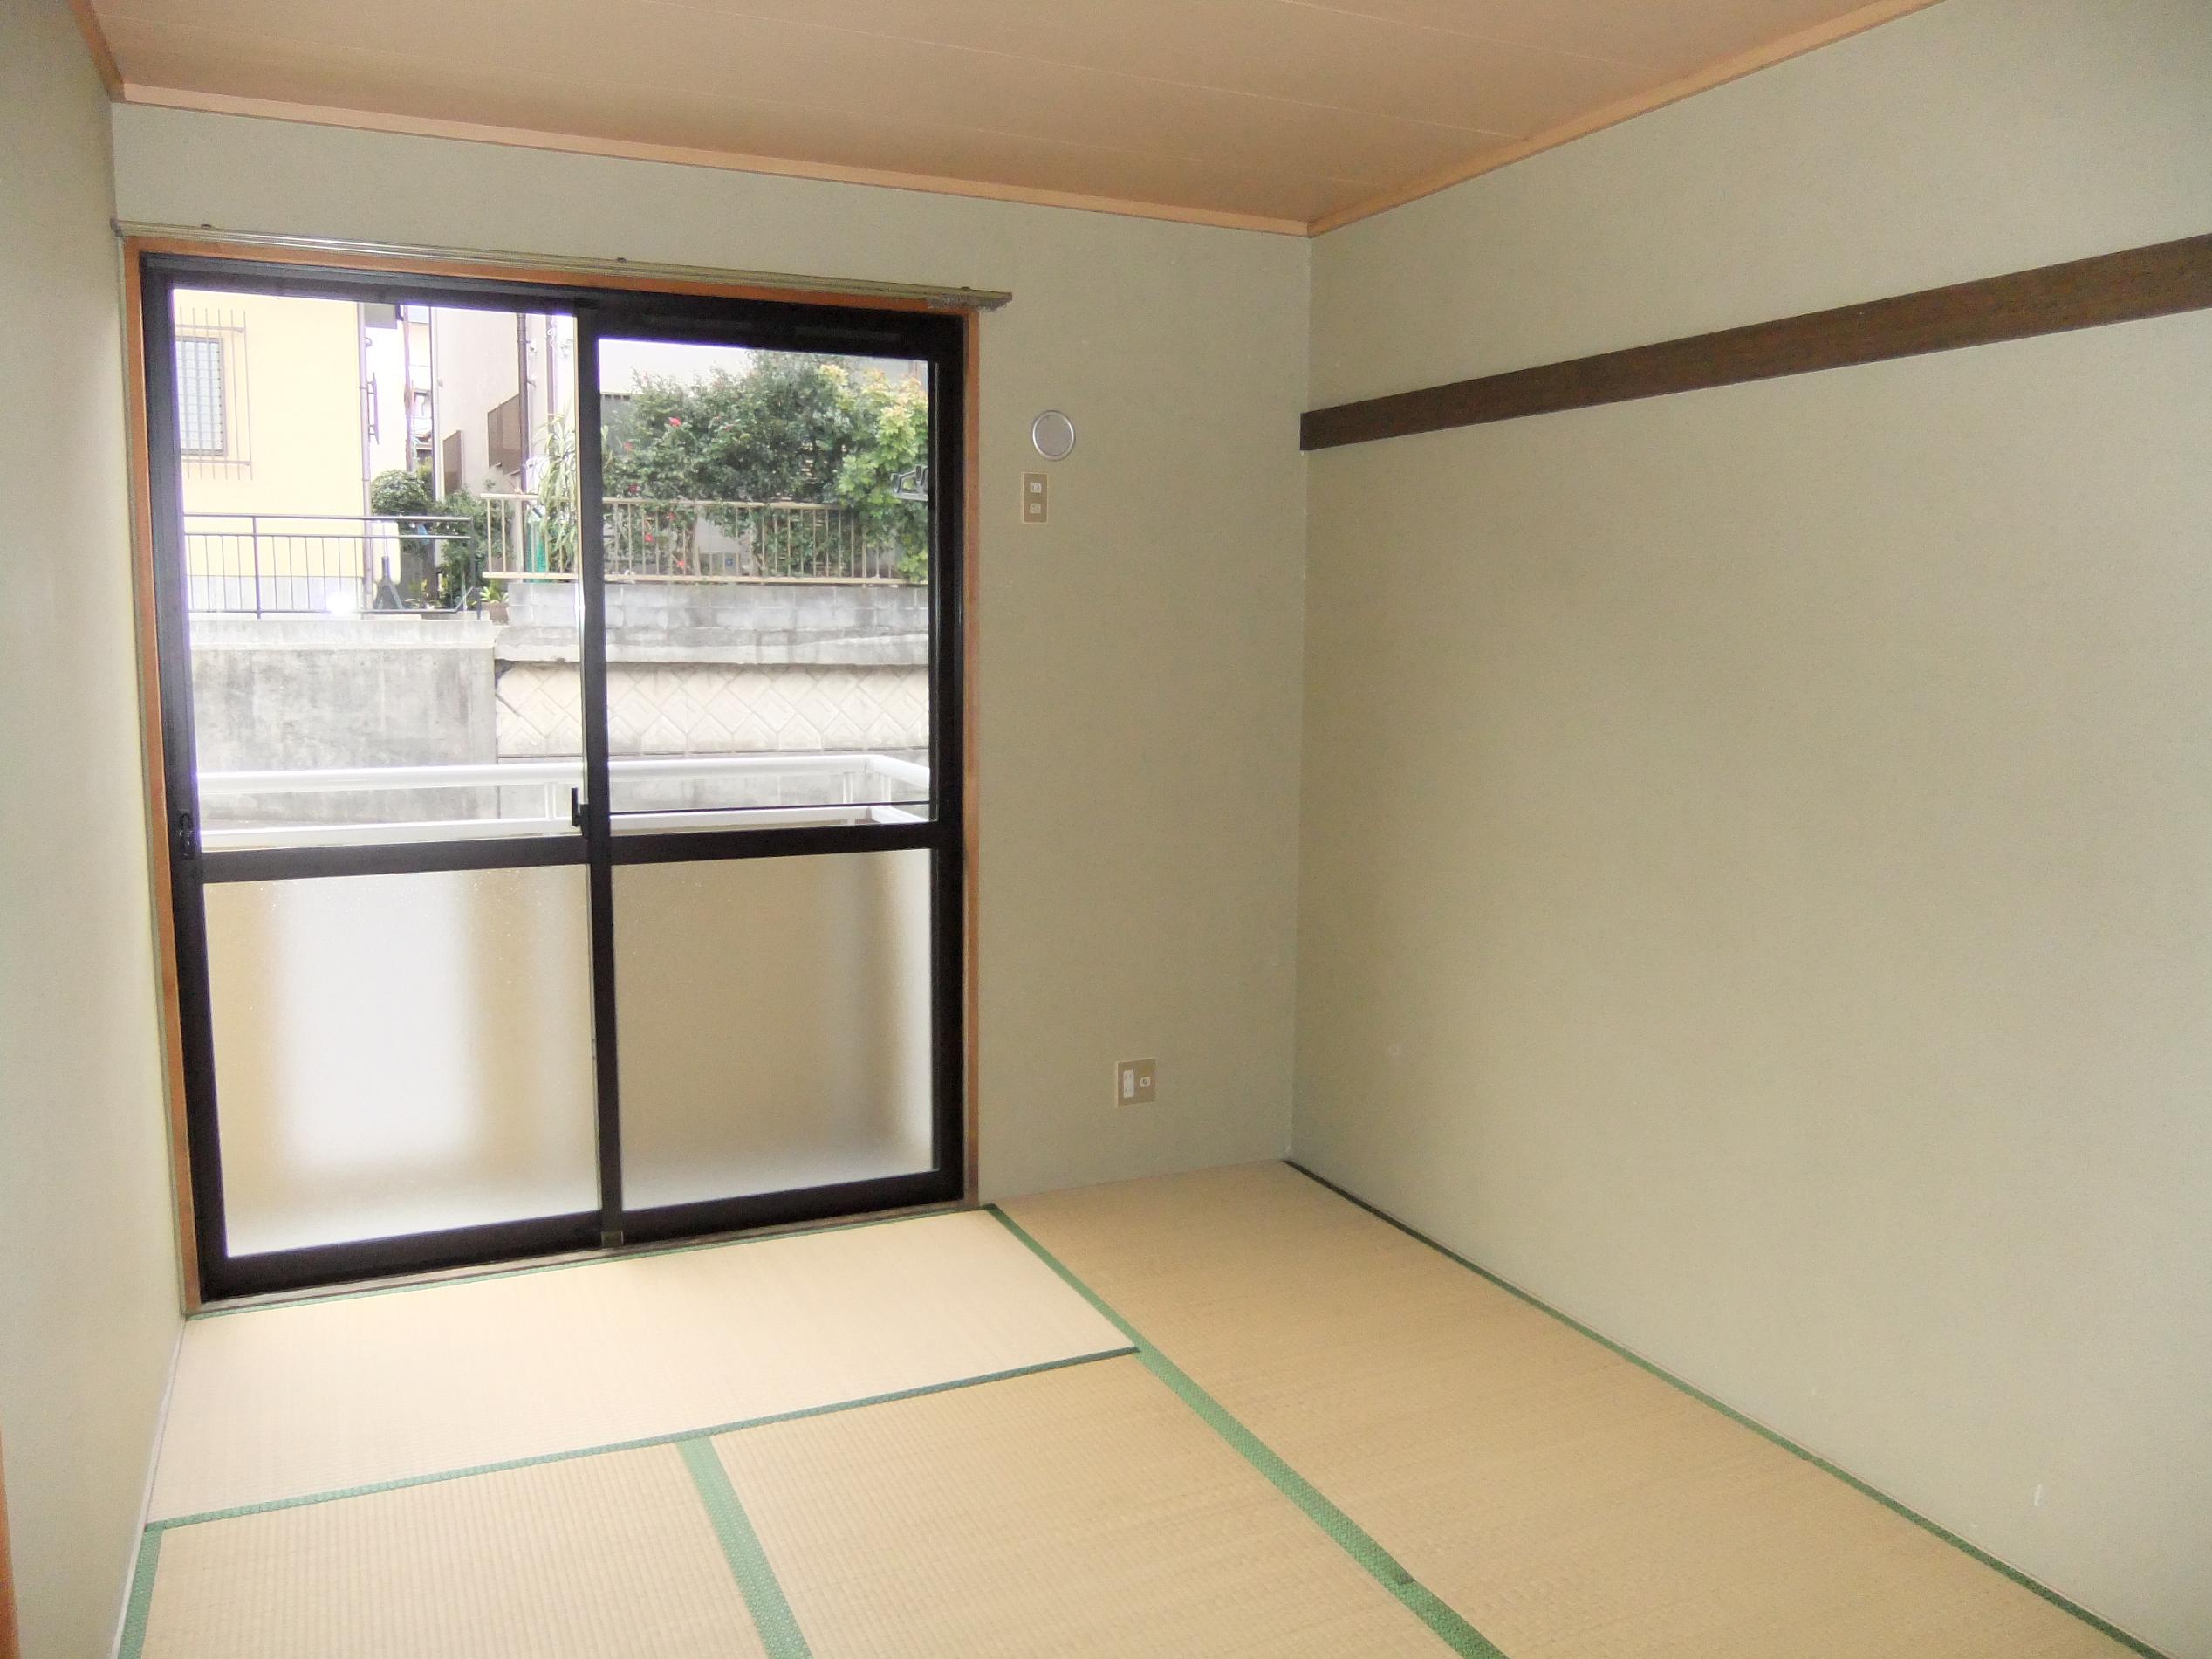 Living and room. It is the right side of the Japanese-style room from the kitchen